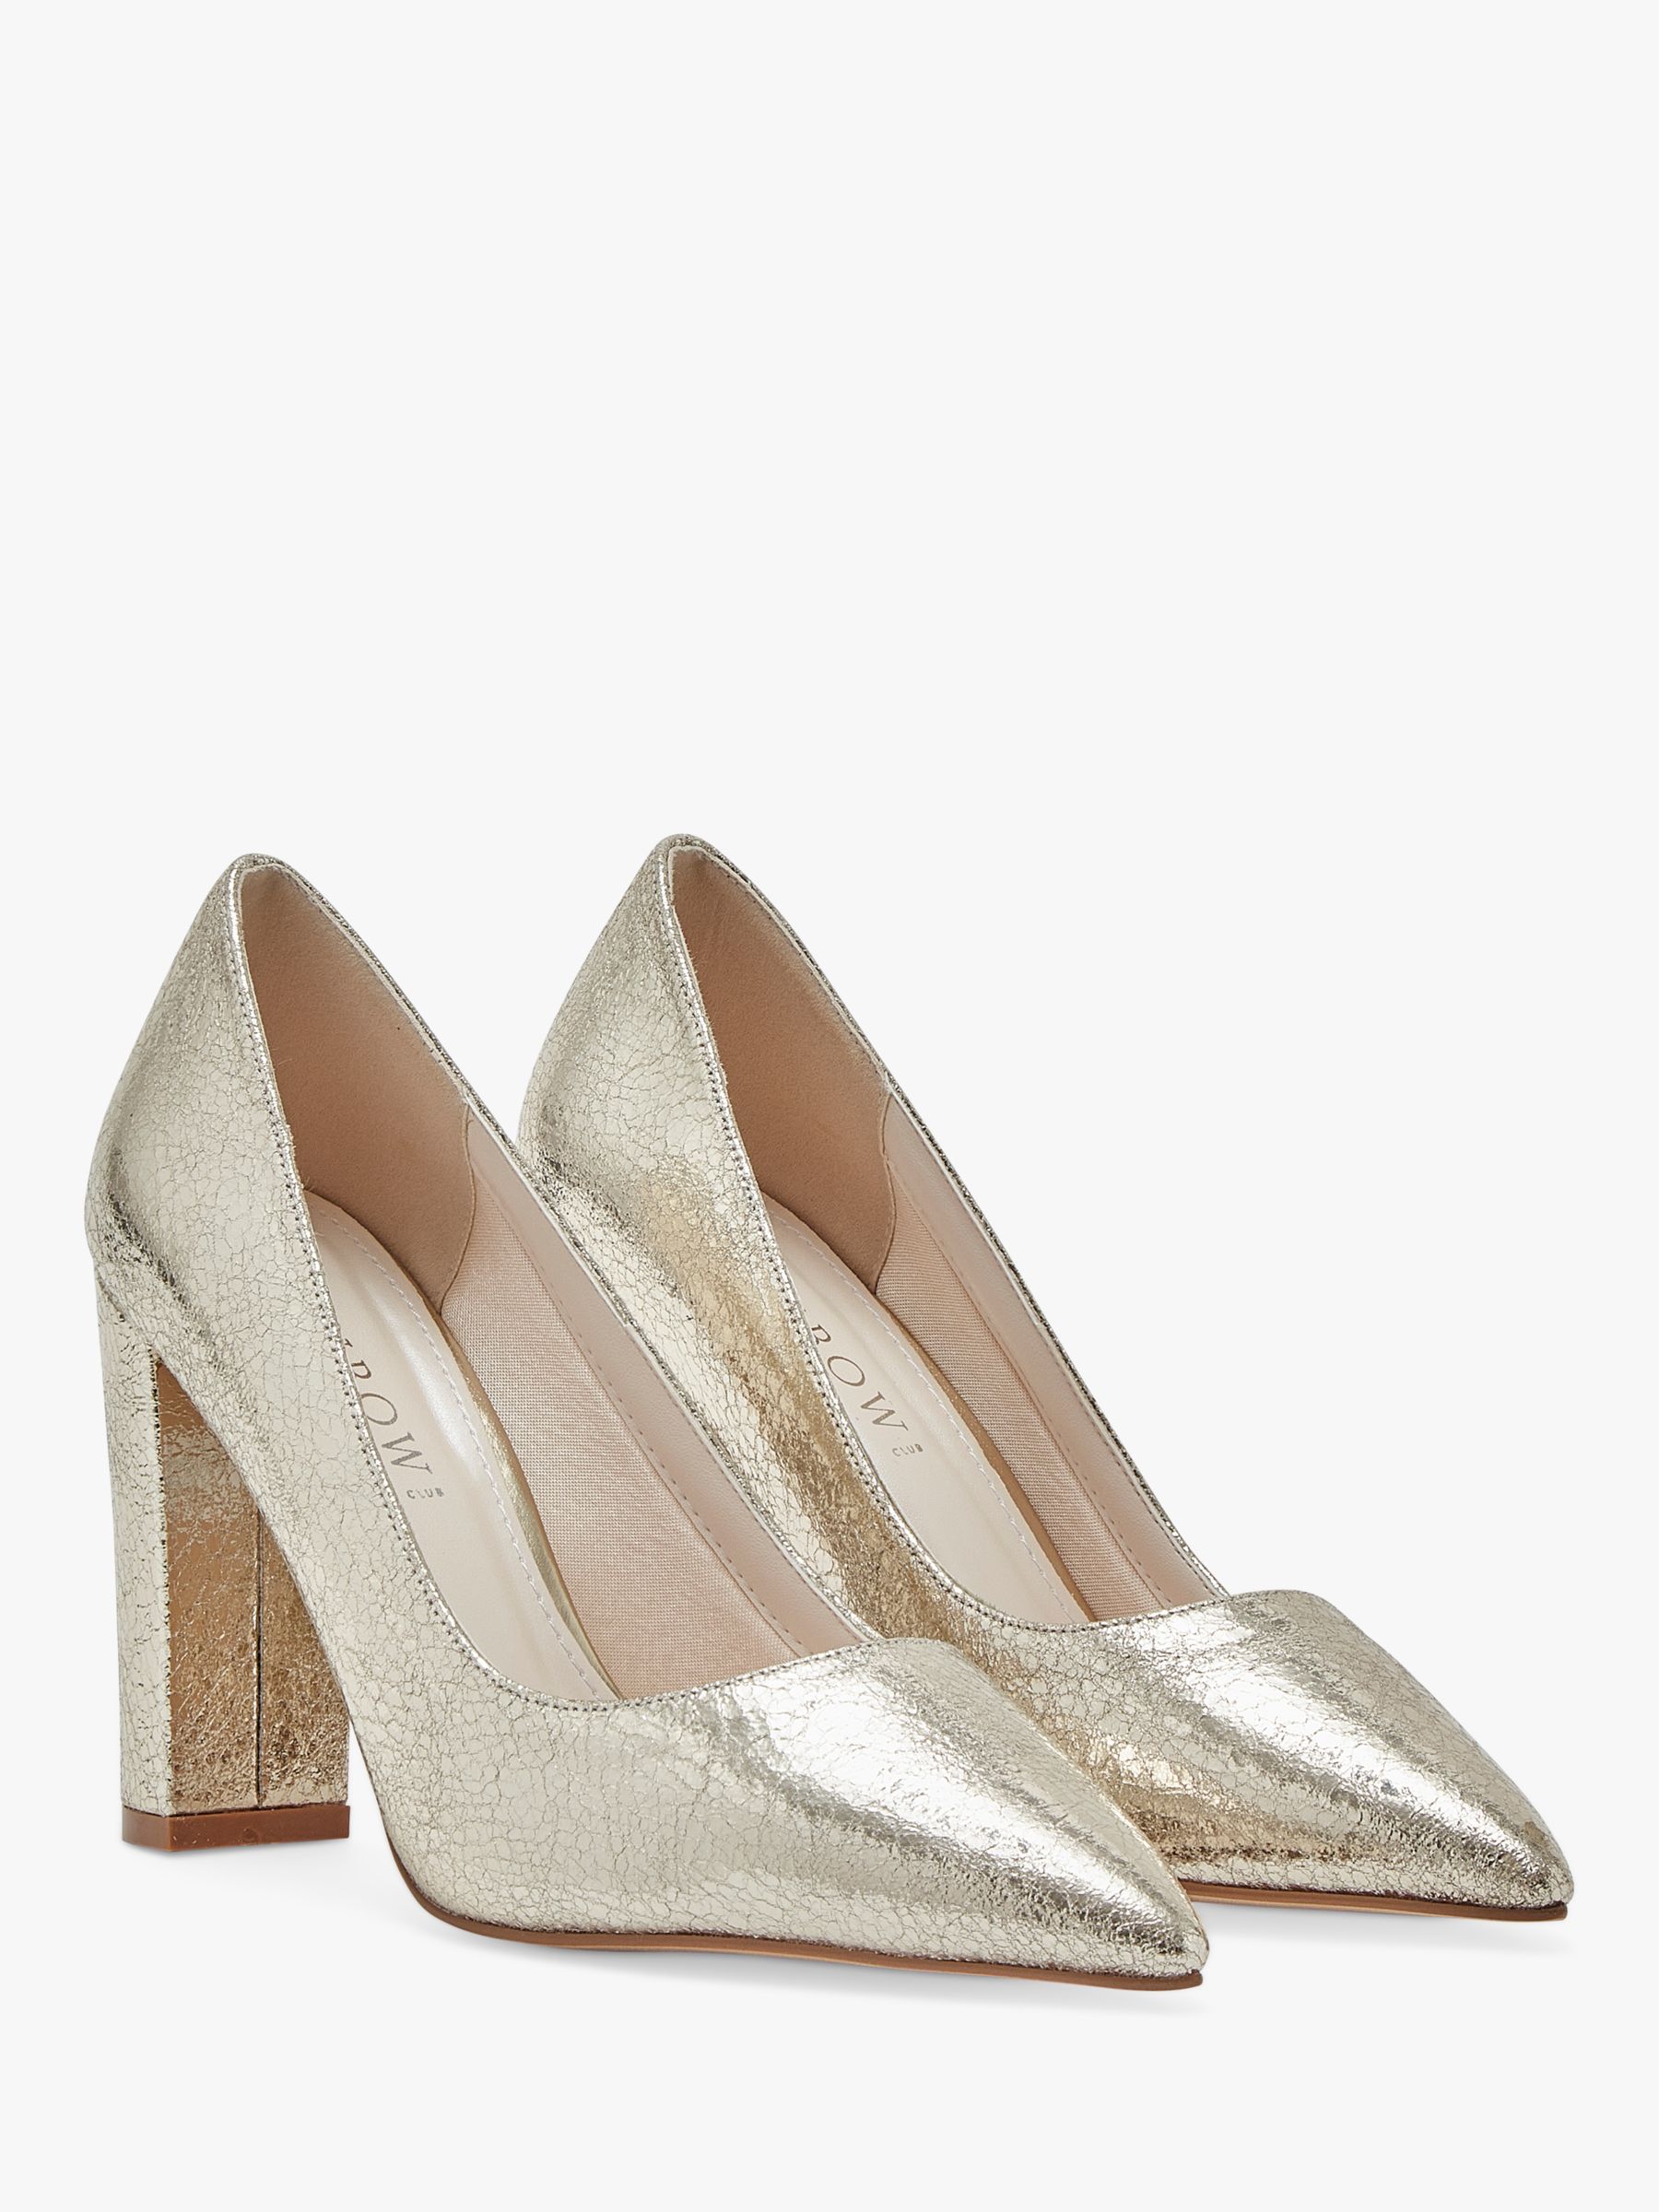 Rainbow Club Remi Block Heel Shoes, Crackled Gold, 3